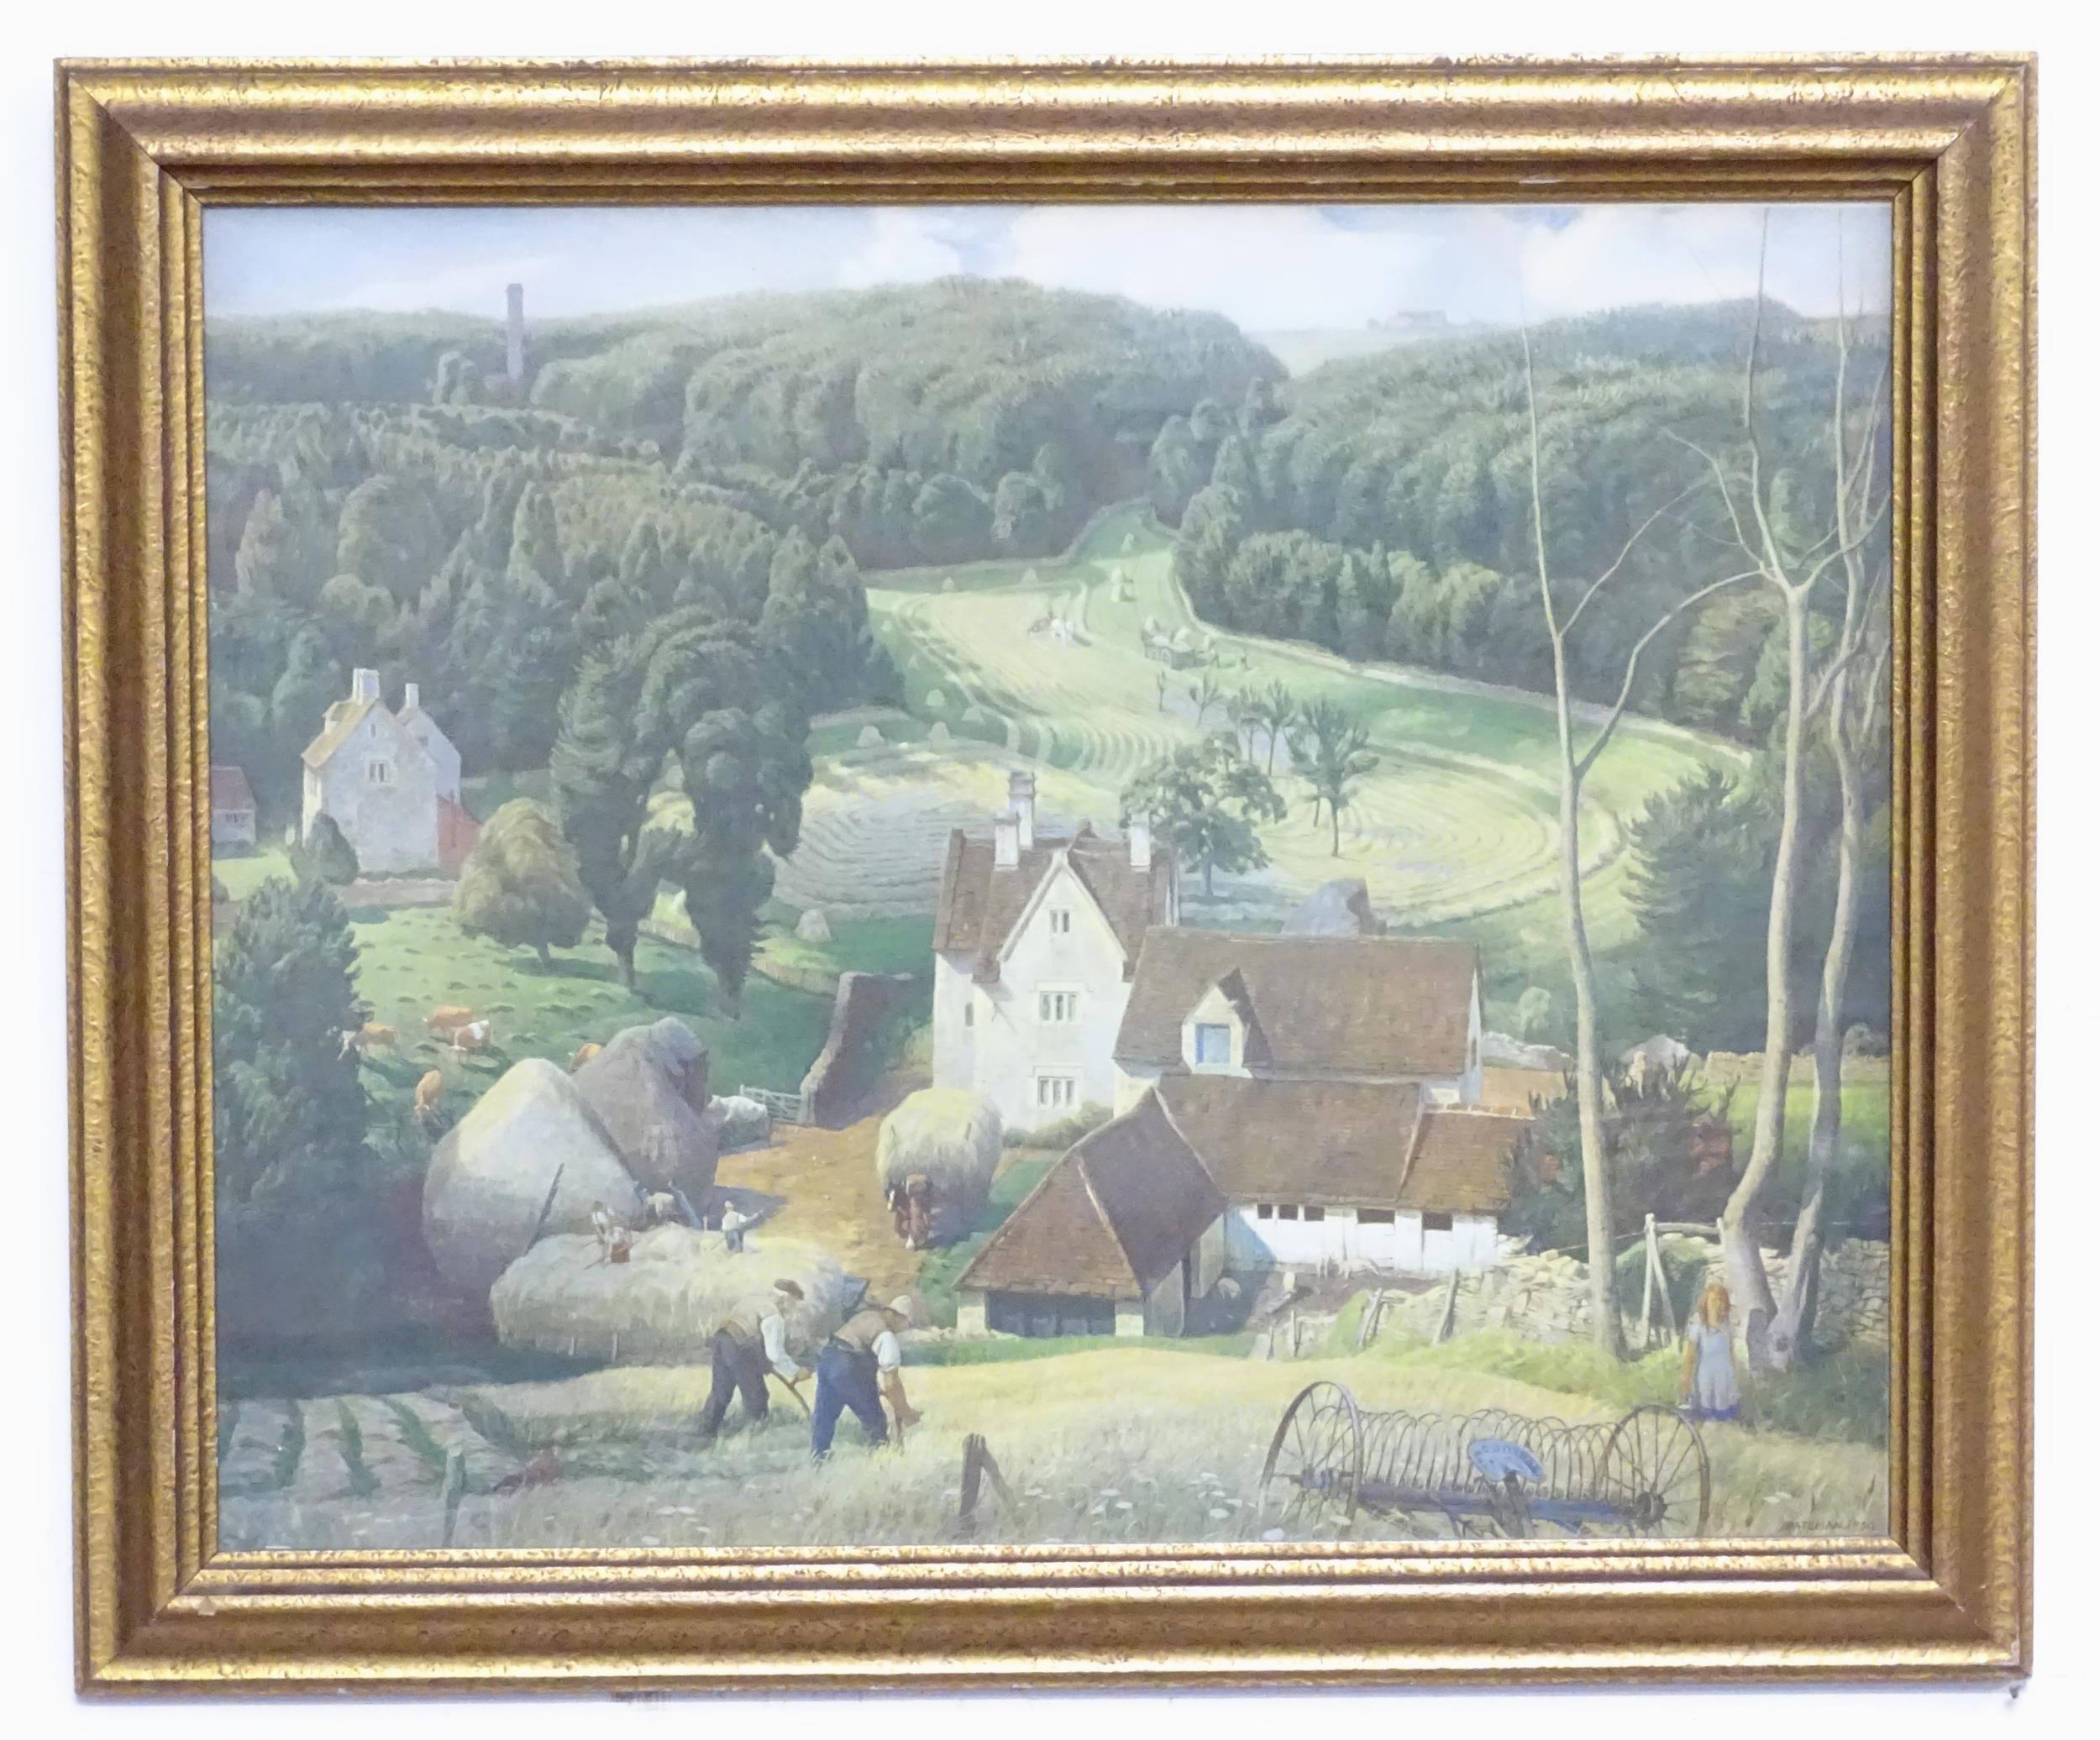 A colour print titled Hay Time in the Cotswolds, depicting a country landscape with farmers at work.